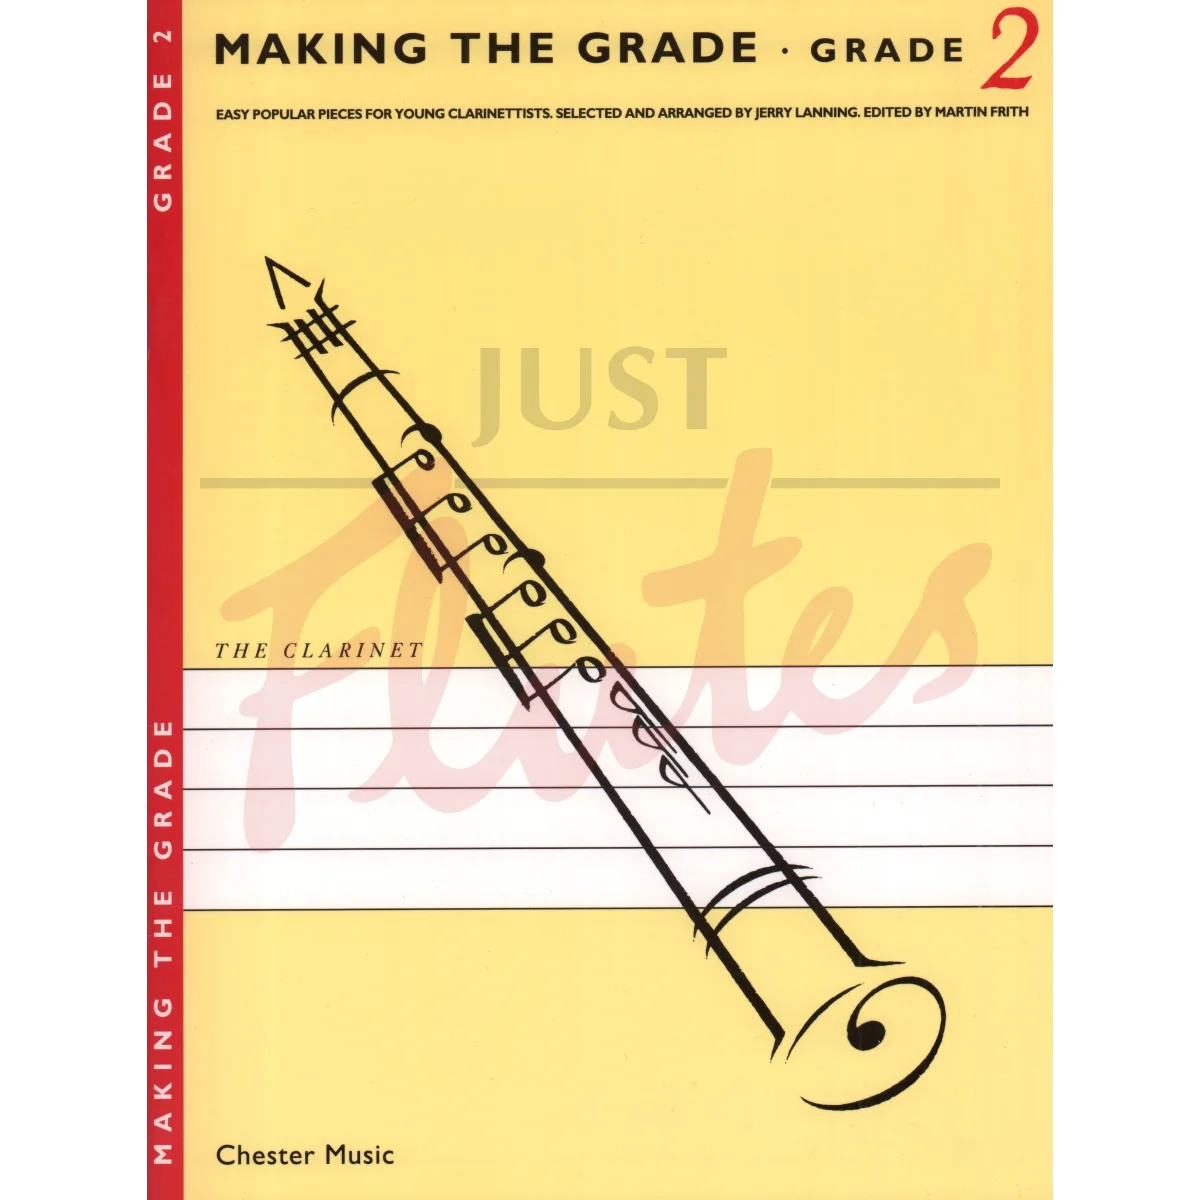 Making the Grade - Grade 2 for Clarinet